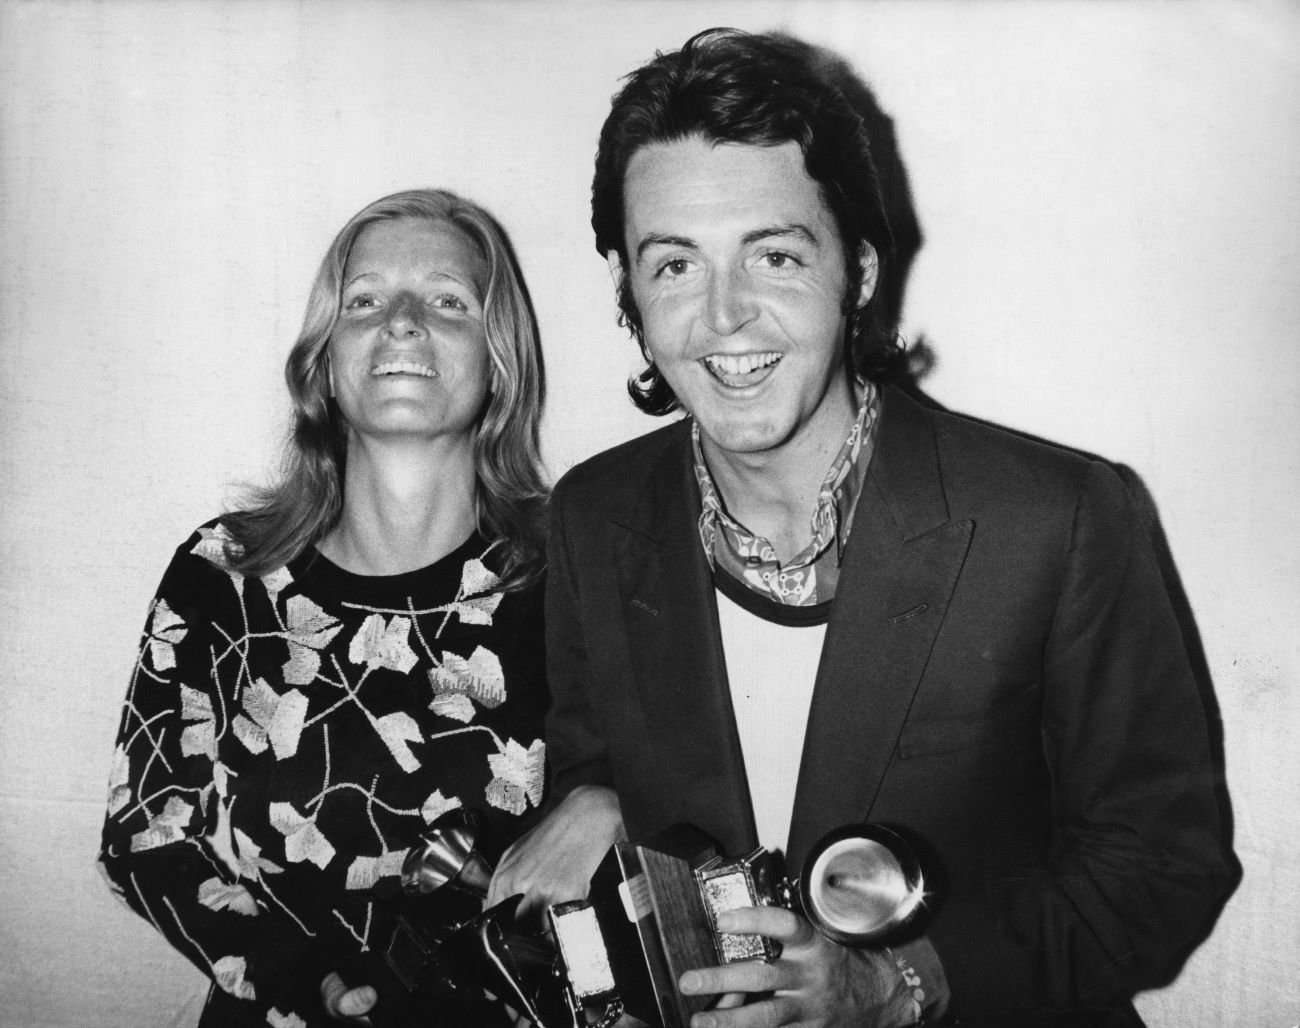 A black and white picture of Linda McCartney standing arm in arm with Paul McCartney, who holds a camera.